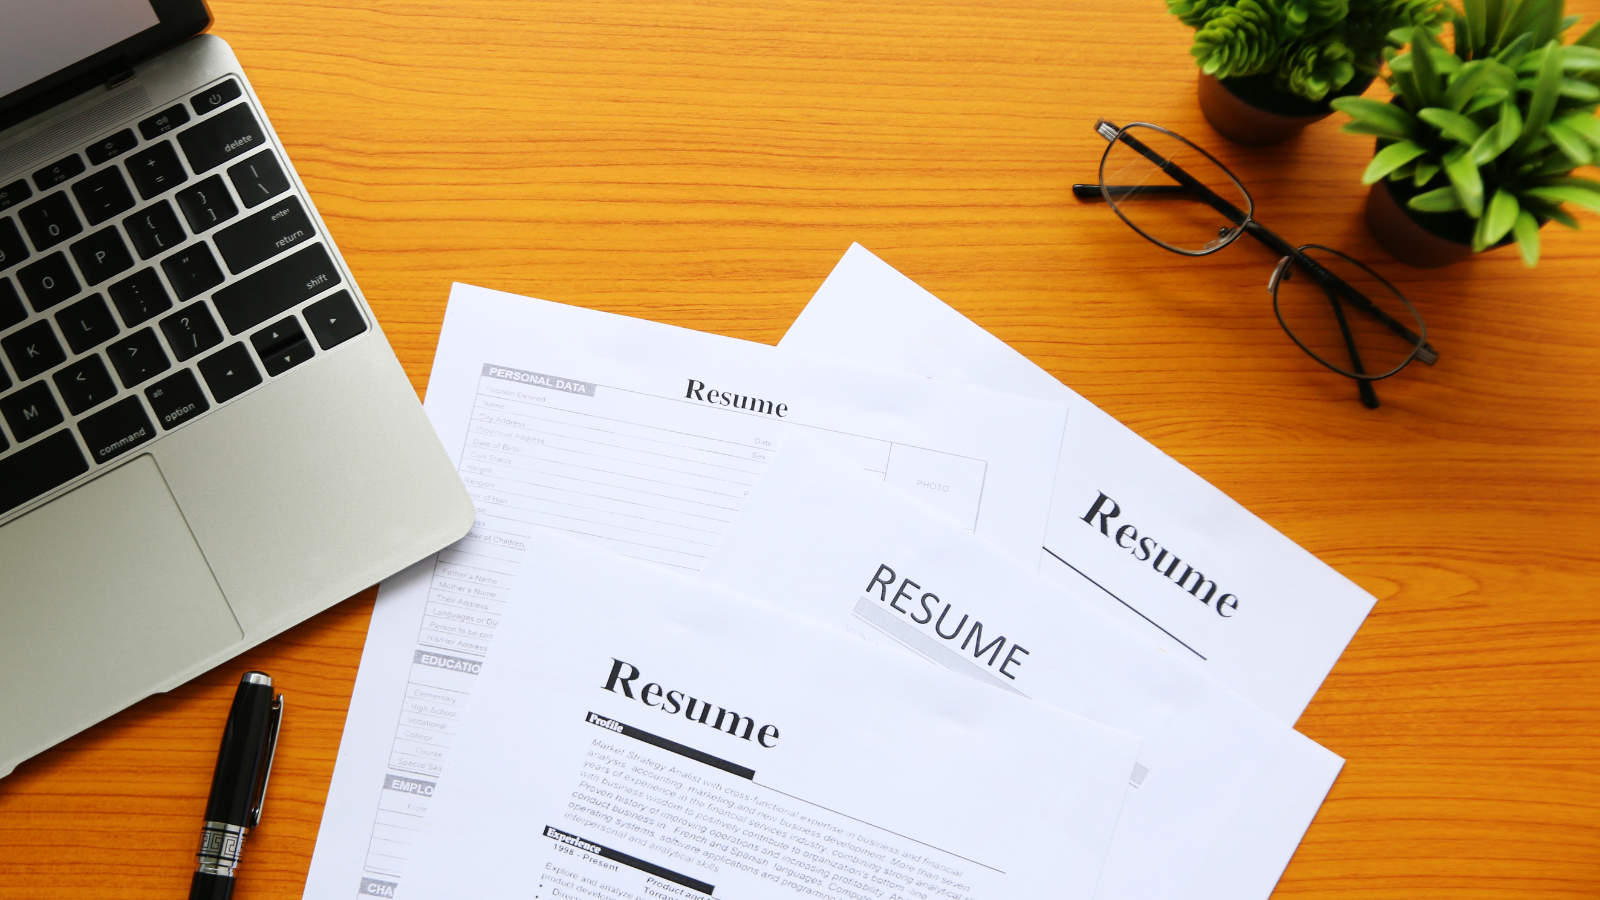 How To Write A Resume For Digital Marketing Jobs